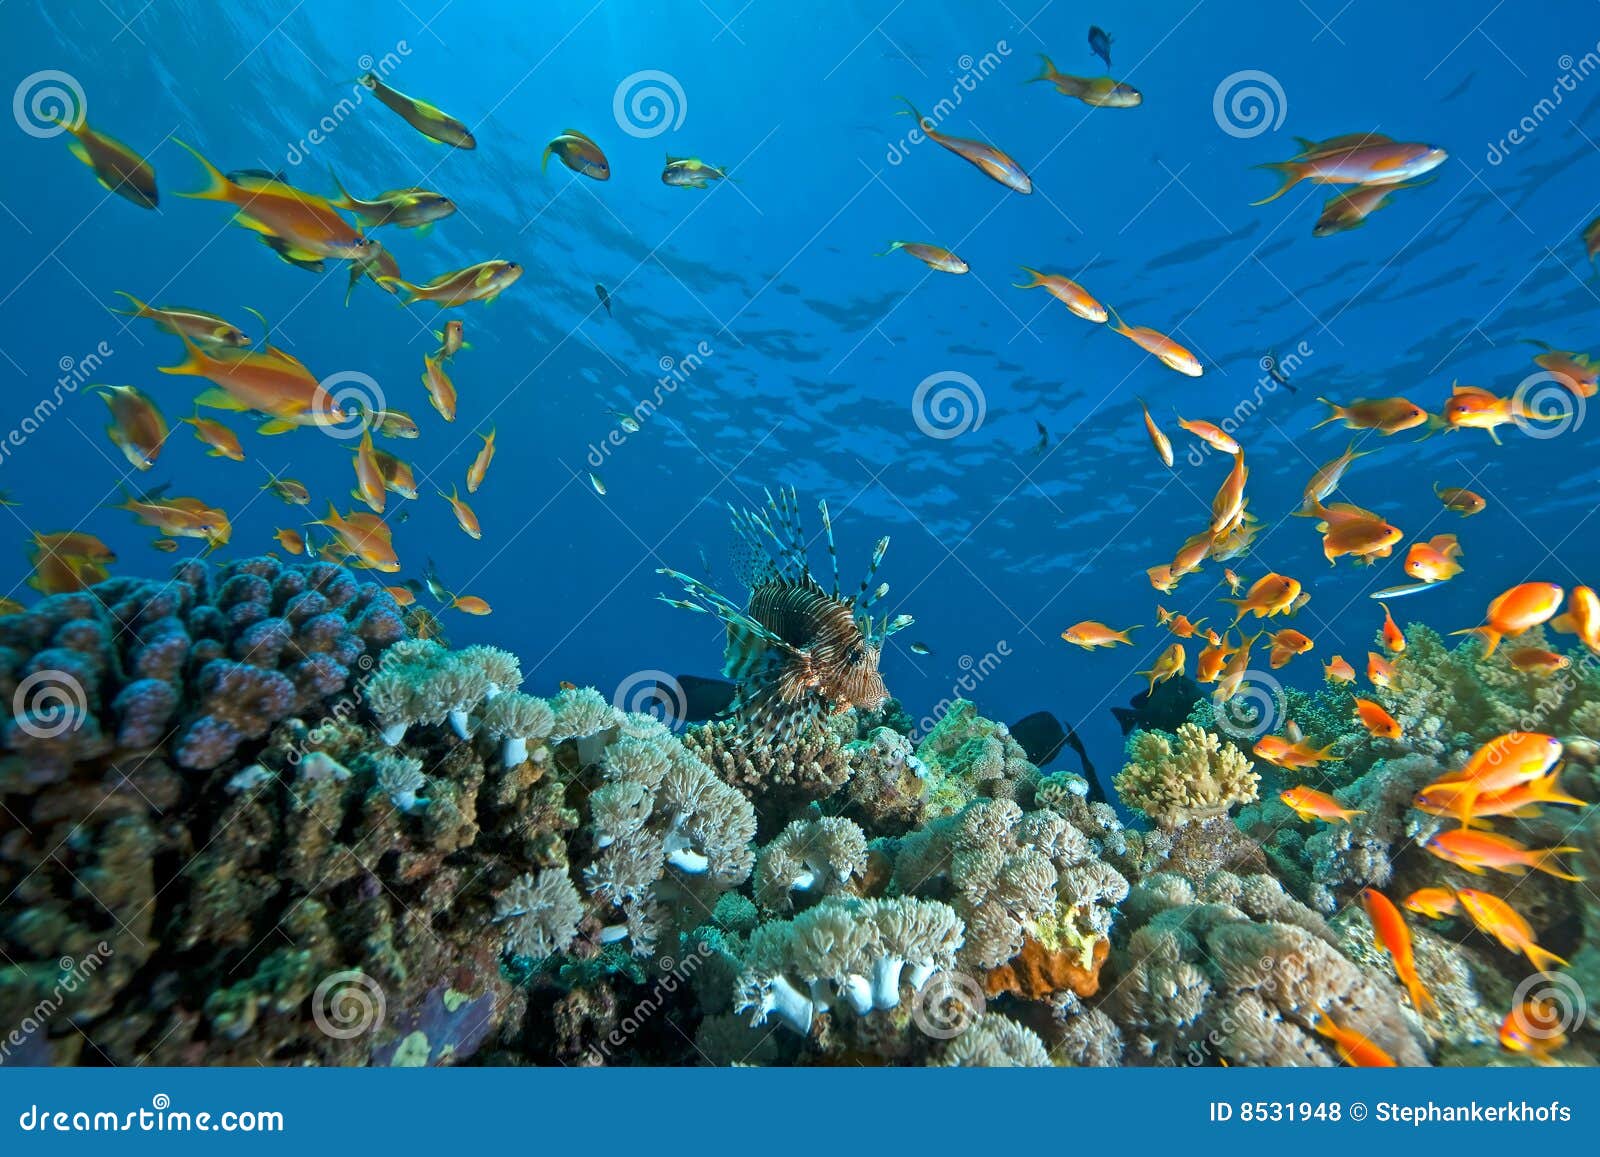 Coral, ocean and fish stock photo. Image of marine, animal - 8531948